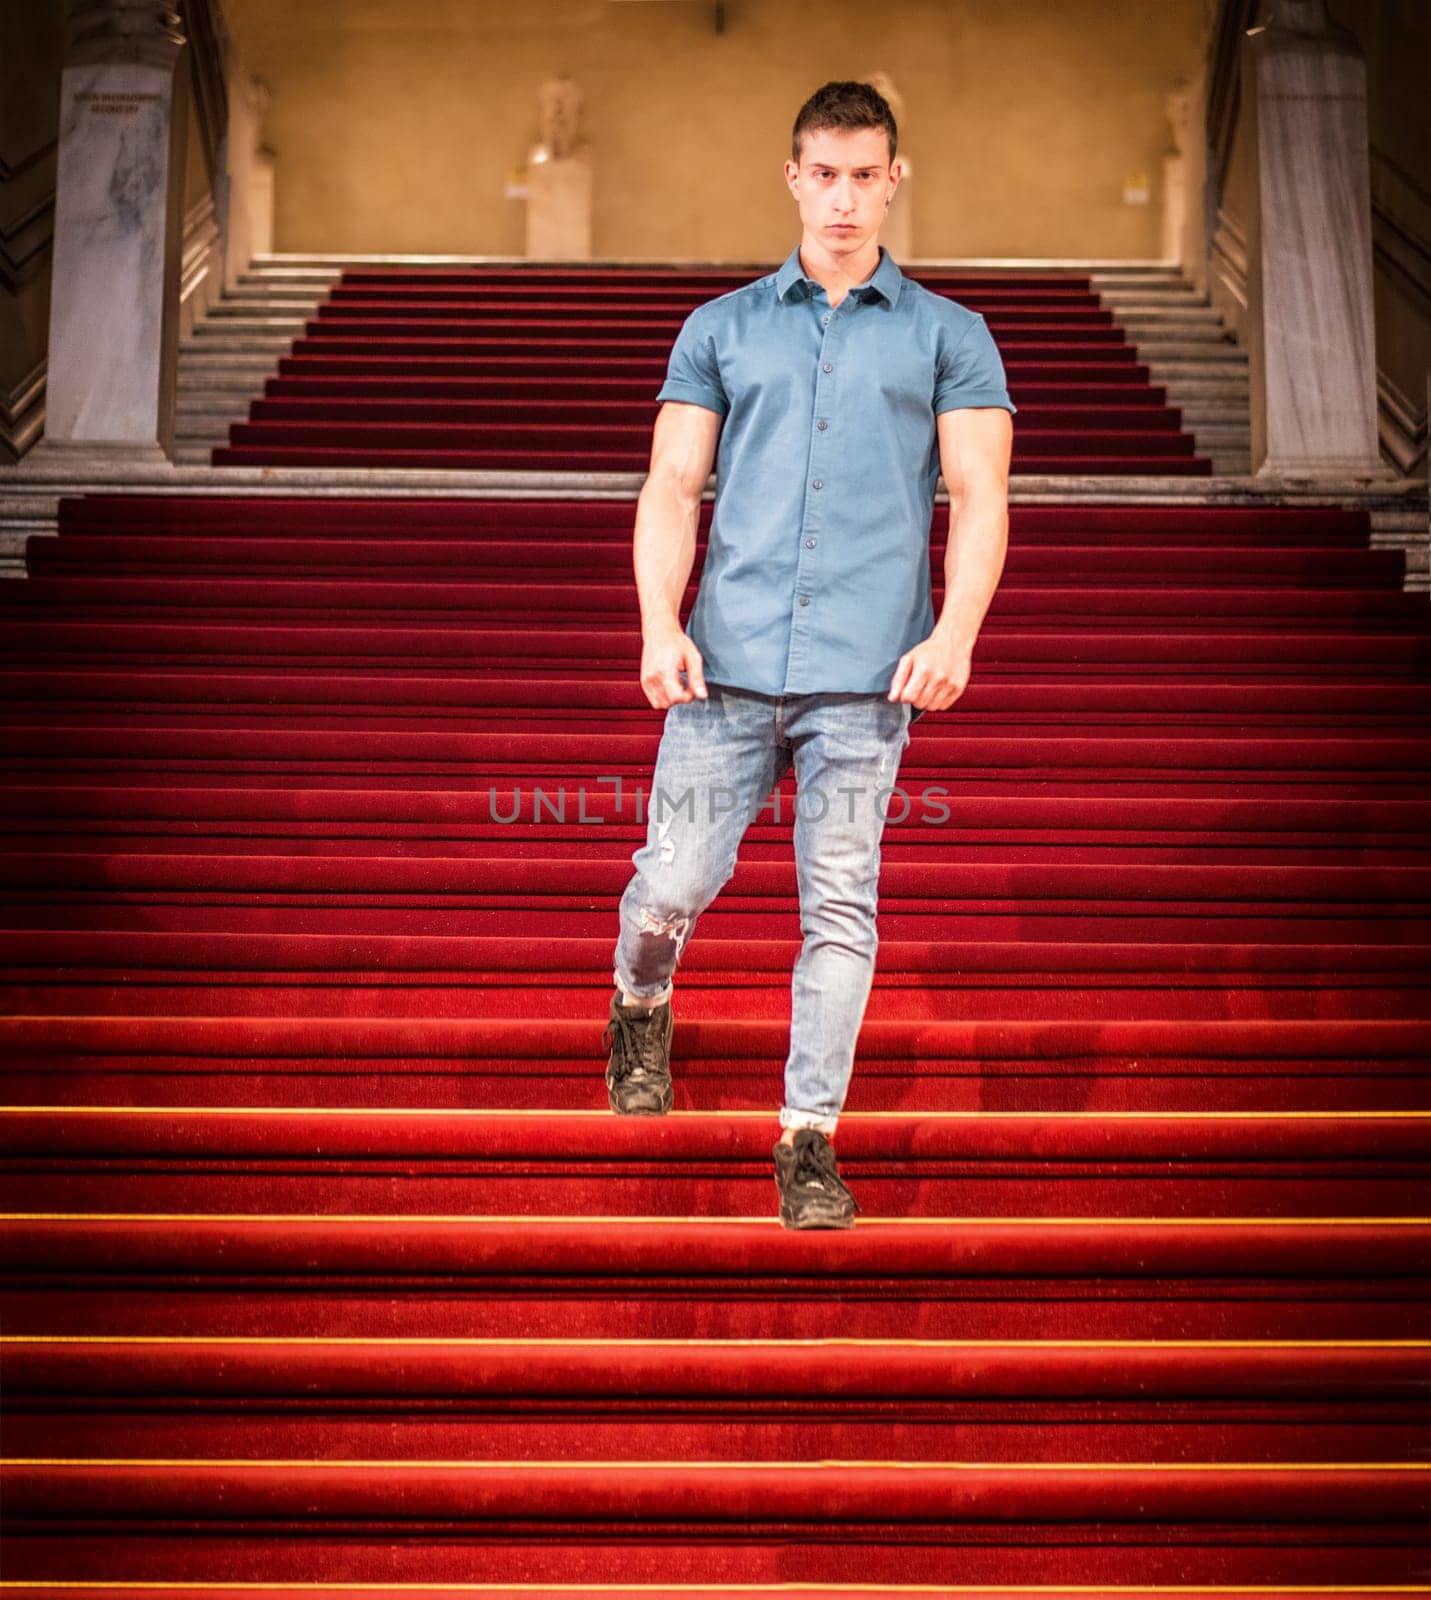 Photo of a man standing on a grand red carpeted staircase by artofphoto